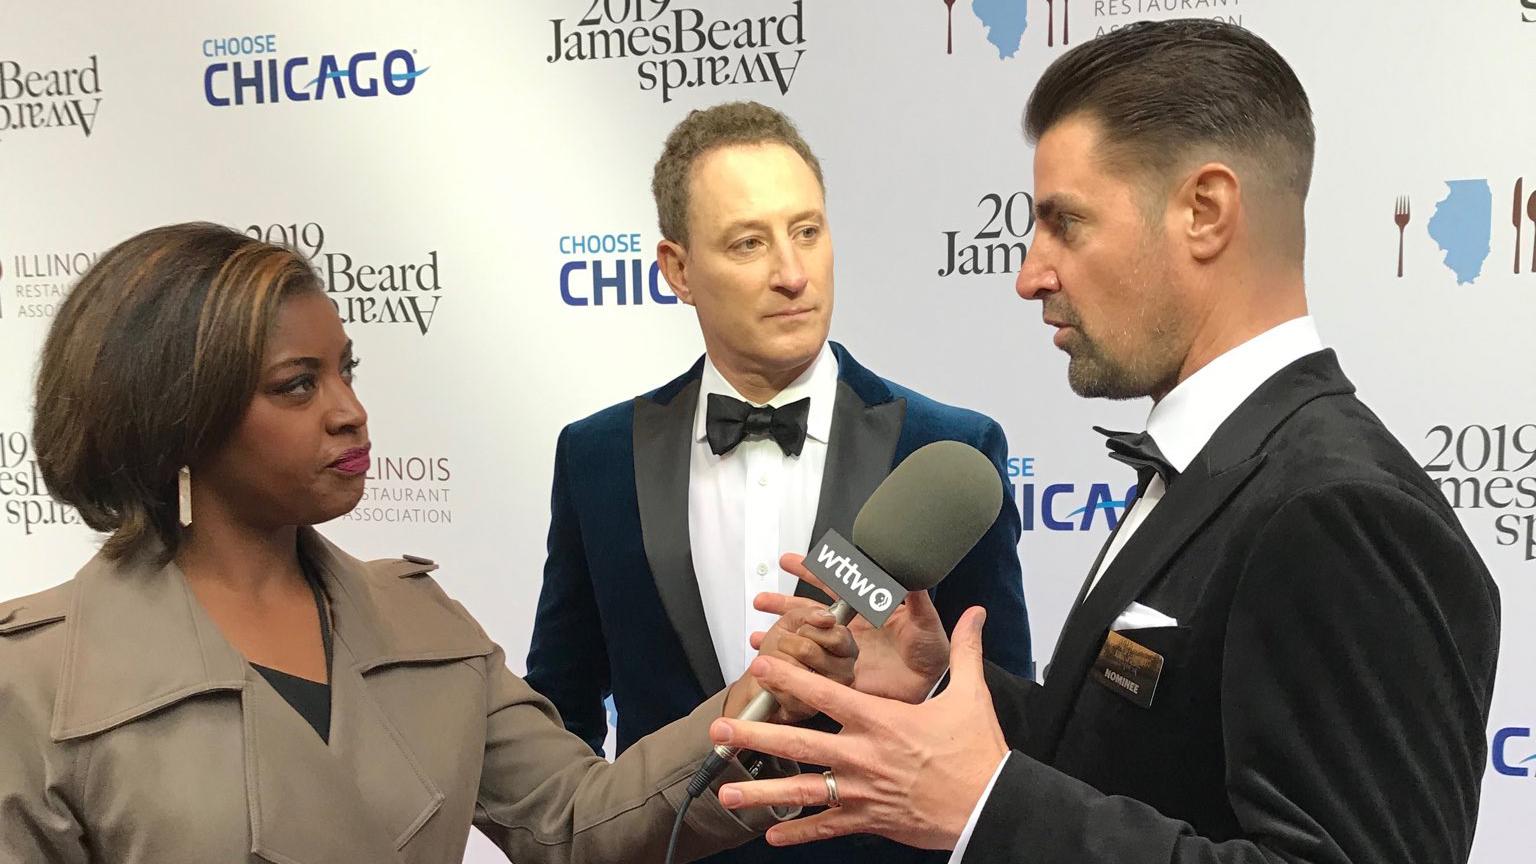 Brandis Friedman talks with James Beard Award winners and Boka Restaurant Group co-founders Rob Katz, left, and Kevin Boehm on Monday, May 6, 2019 before the awards ceremony.